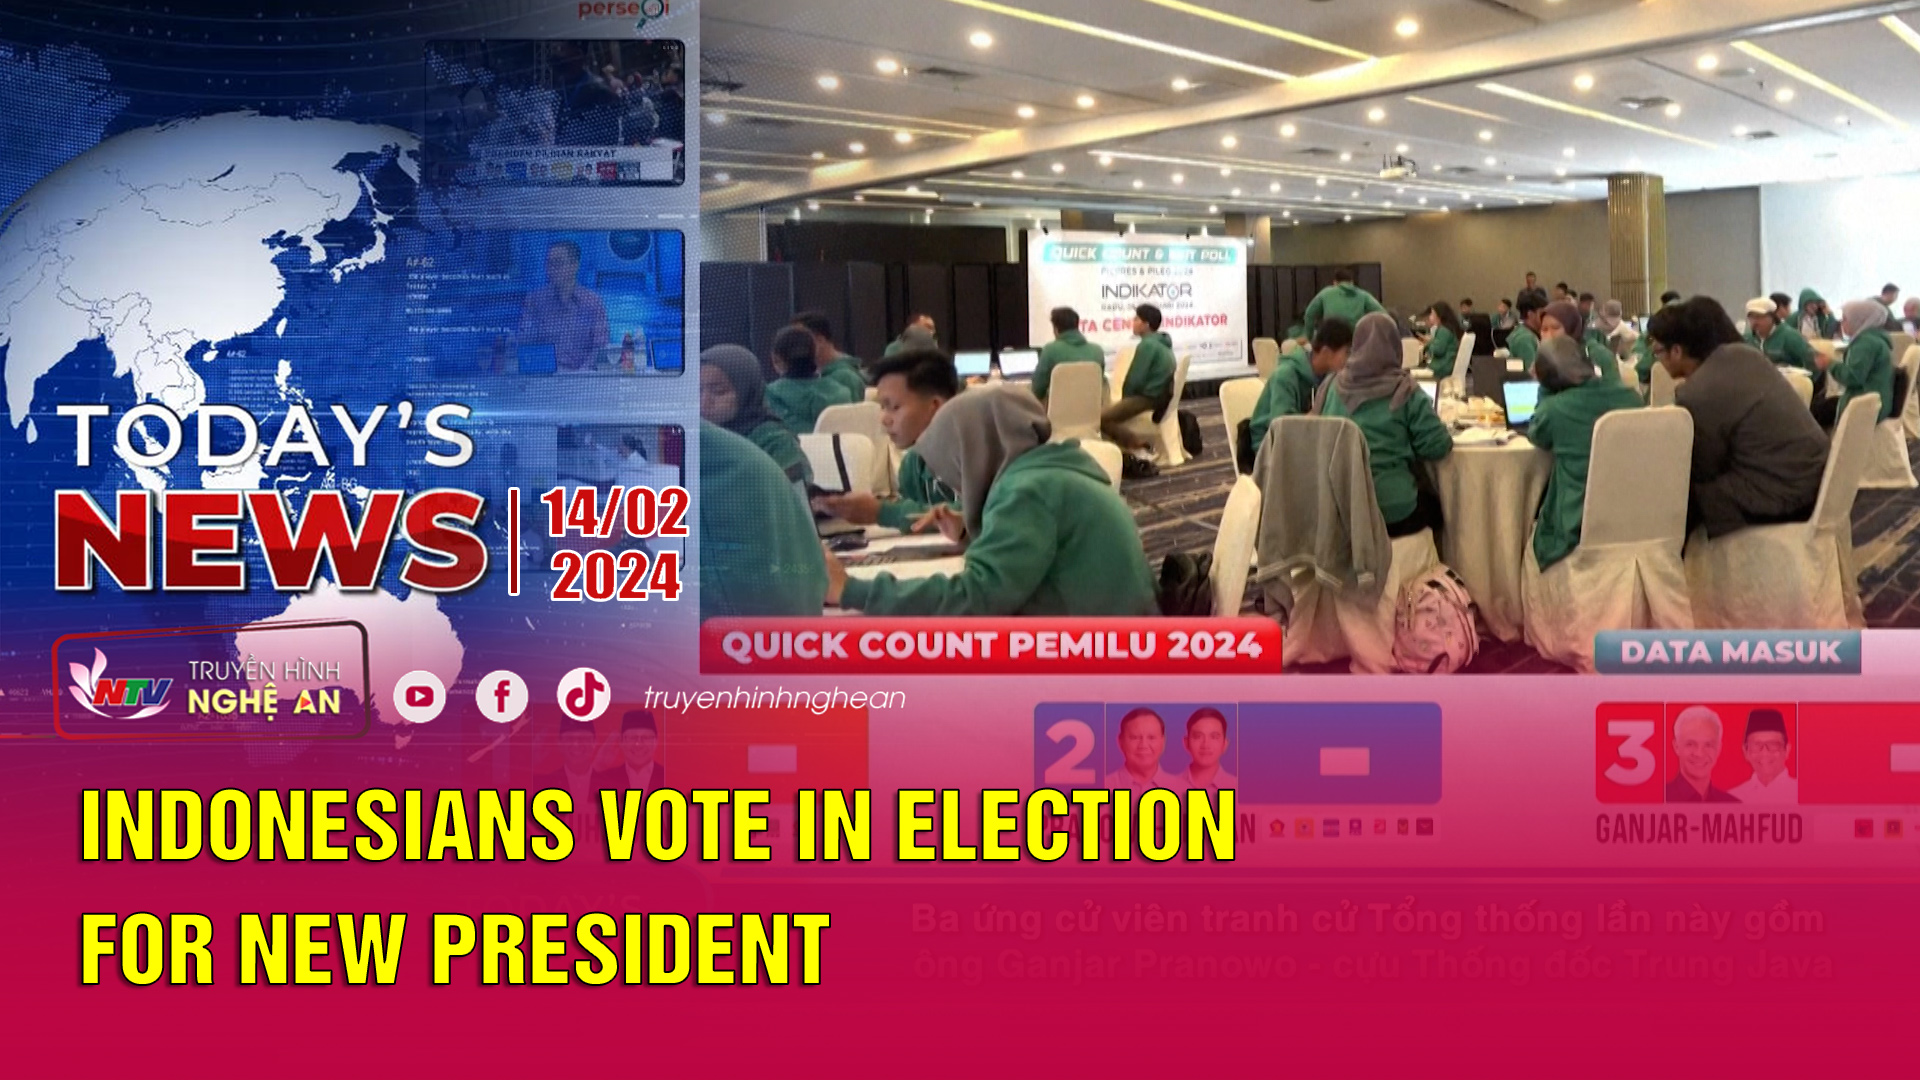 Today's News 14/2/2024: Indonesians vote in election for new president